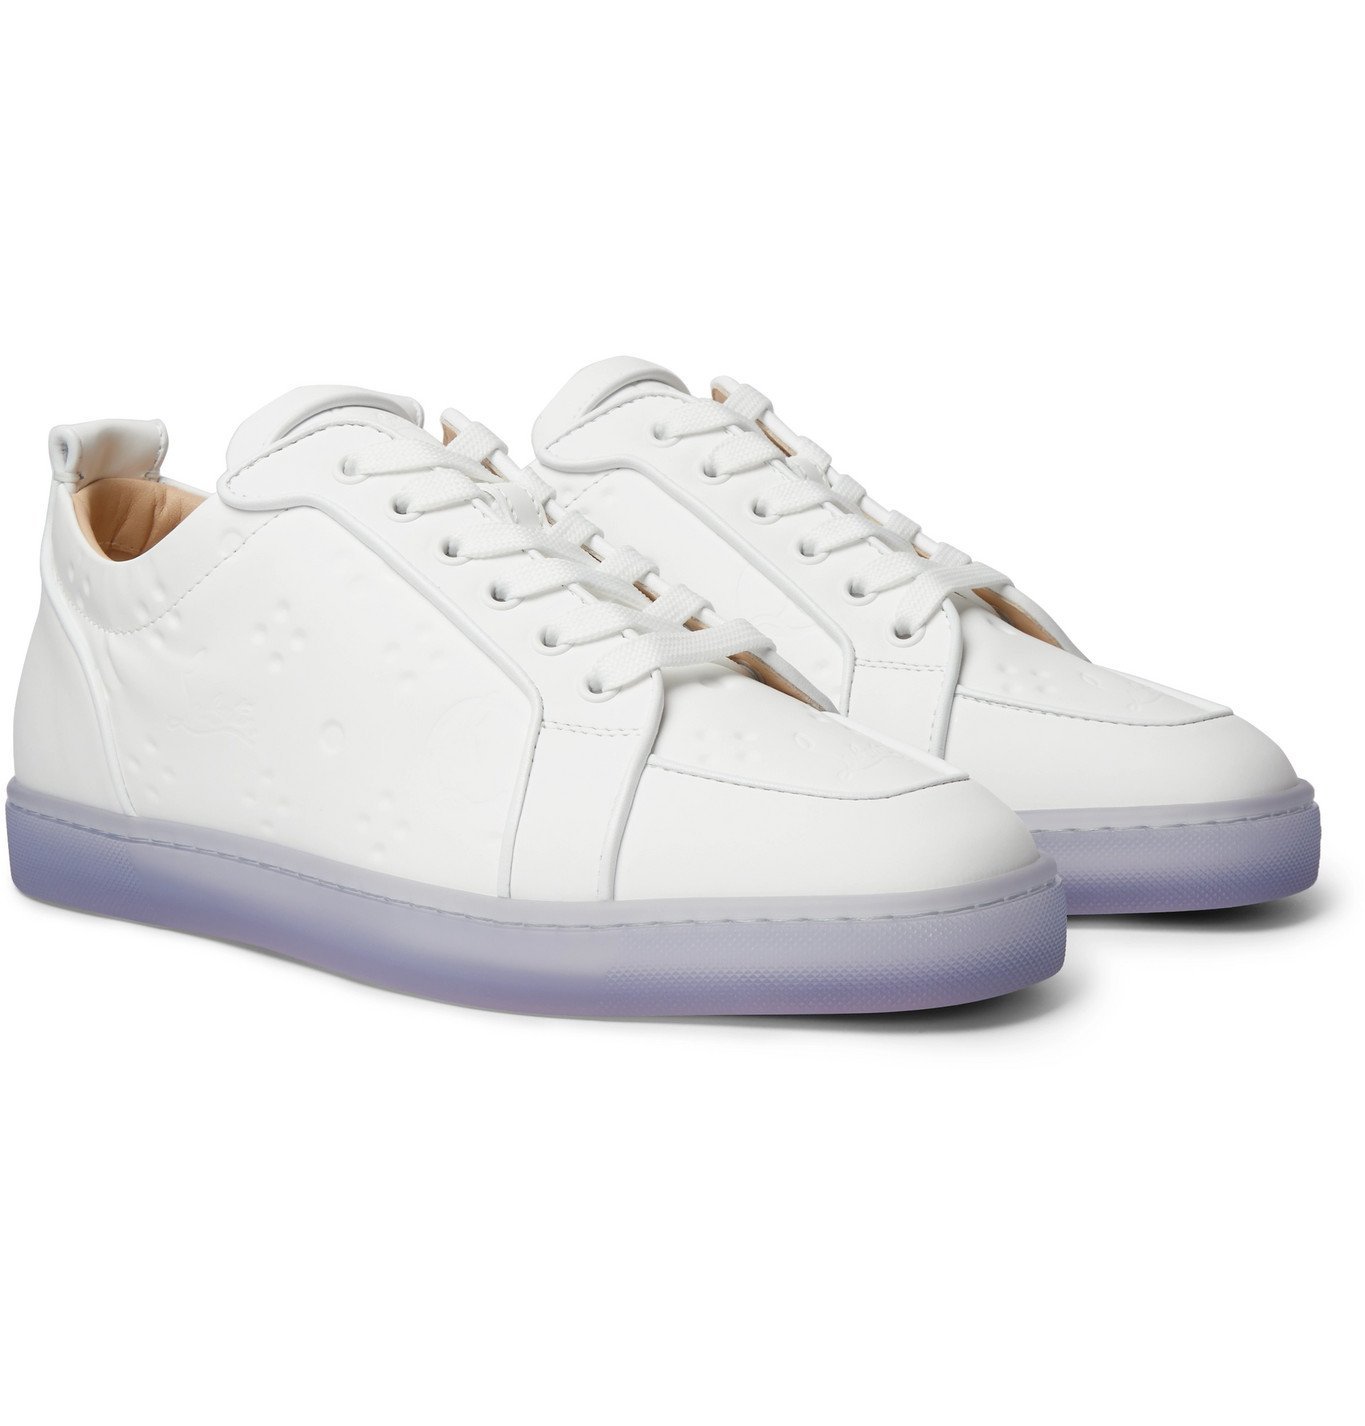 Tæmme appel Ond Christian Louboutin - Rantulow Orlato Debossed Leather Sneakers - White  Christian Louboutin